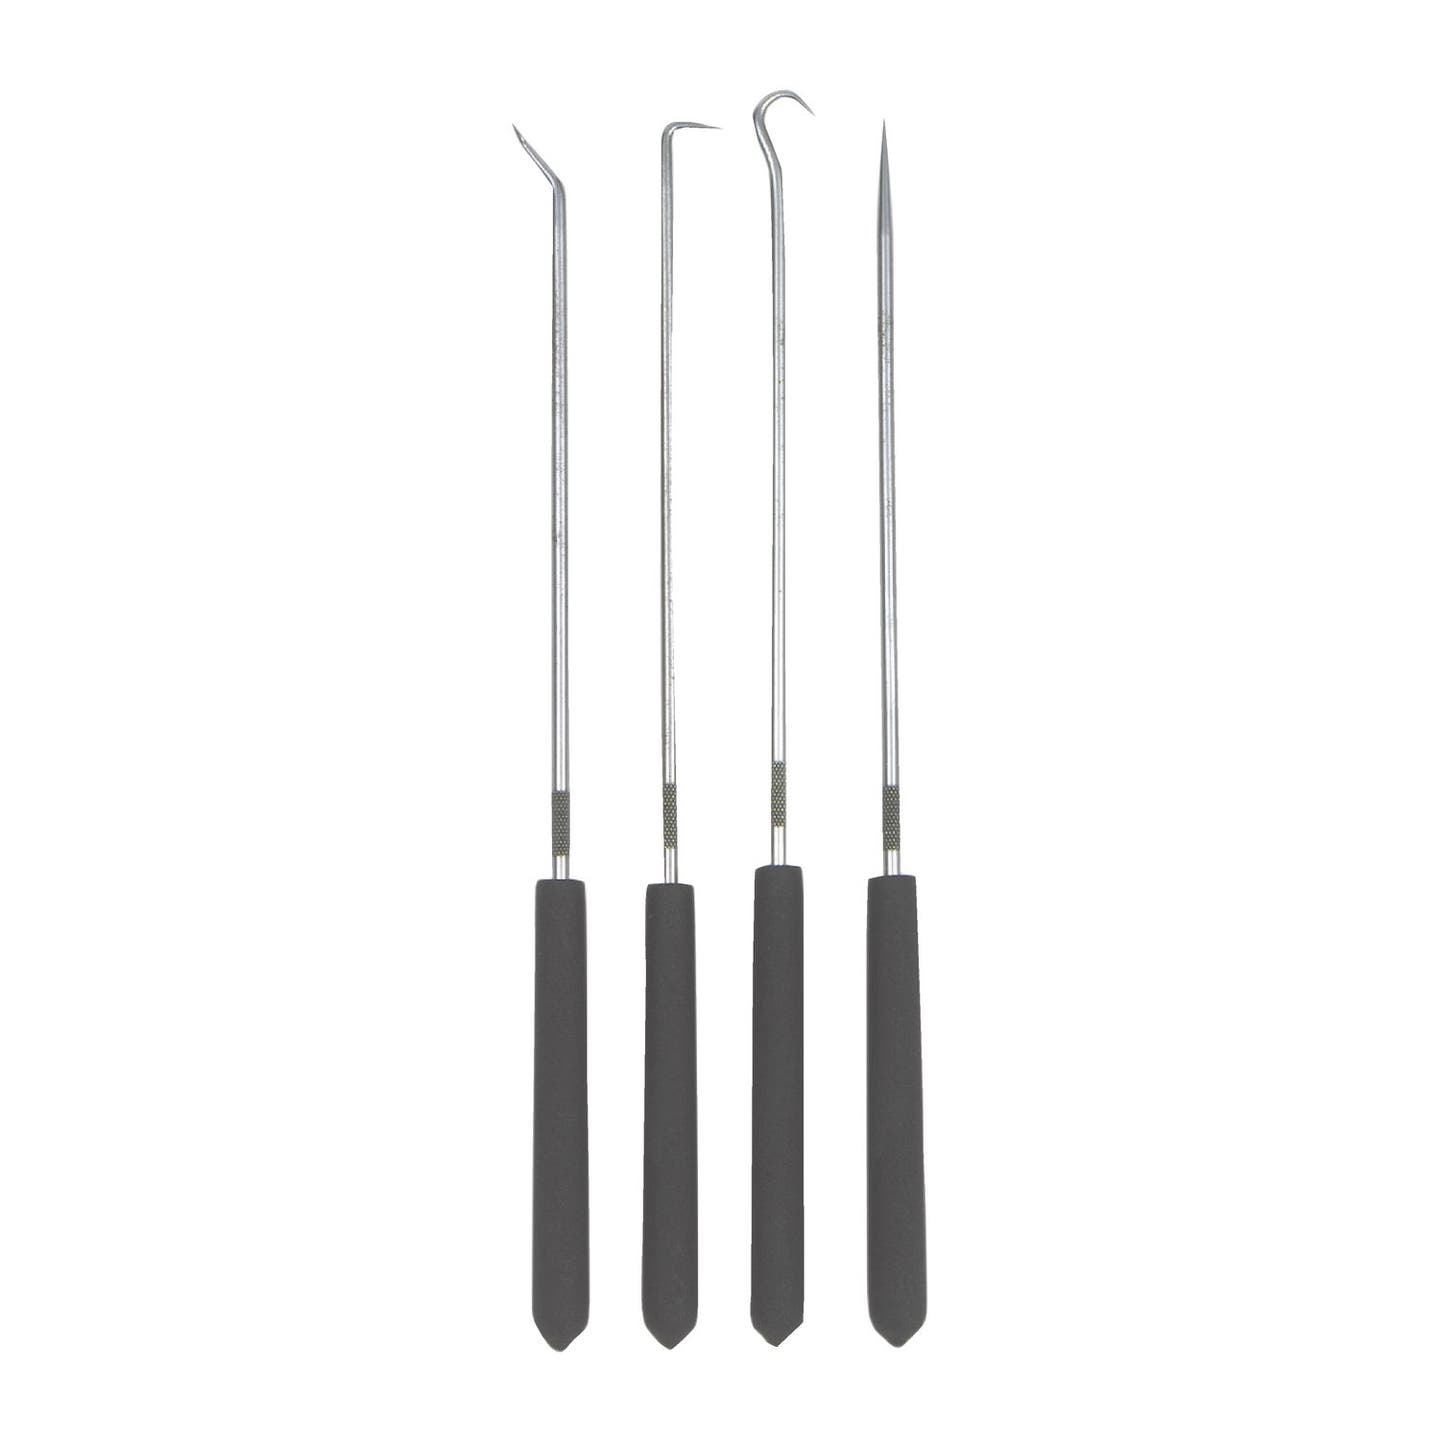 4 PIECE LONG HOOK AND PICK SET WITH CUSHION GRIP